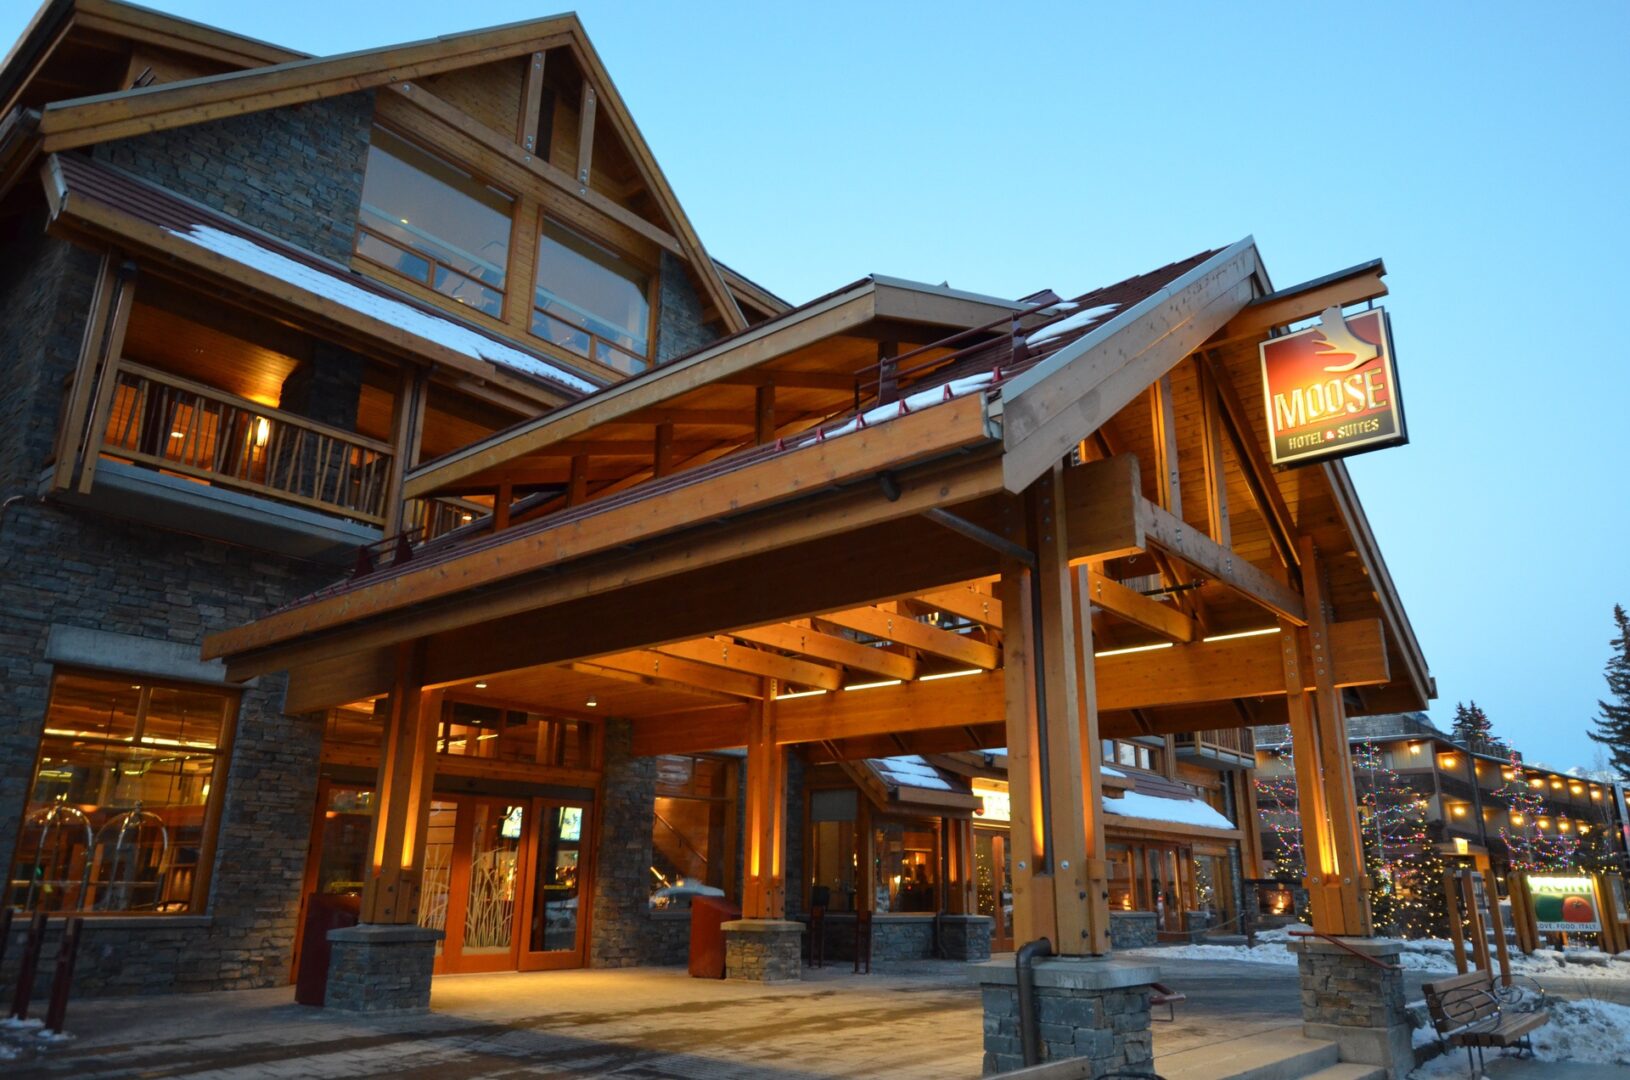 Moose hotel and suites in Banff